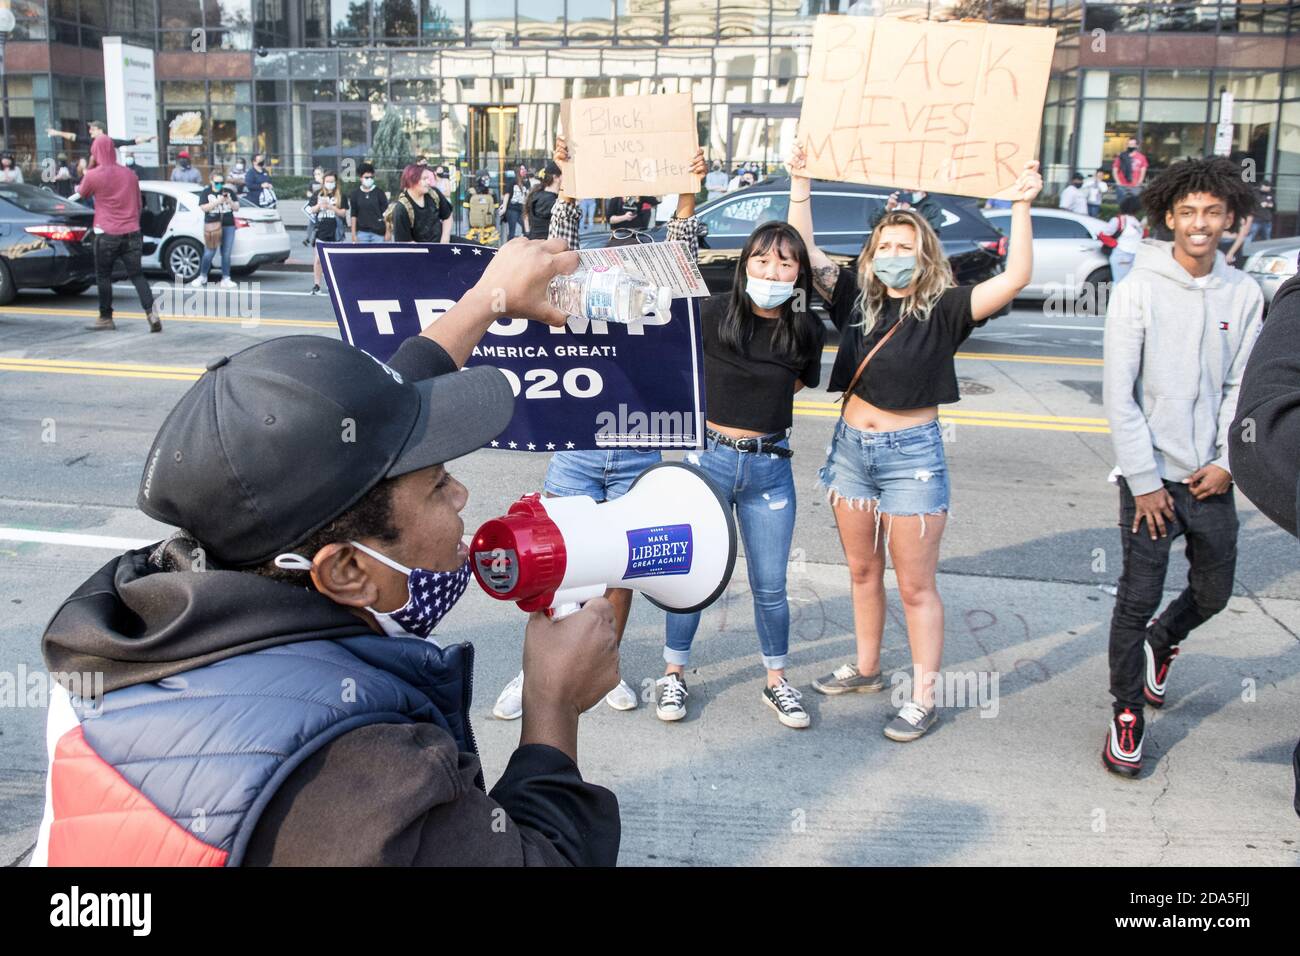 Protestors gather at the Ohio Statehouse in Columbus, Ohio on Saturday shortly after the presidential projection for Joe Biden was announced. Stock Photo